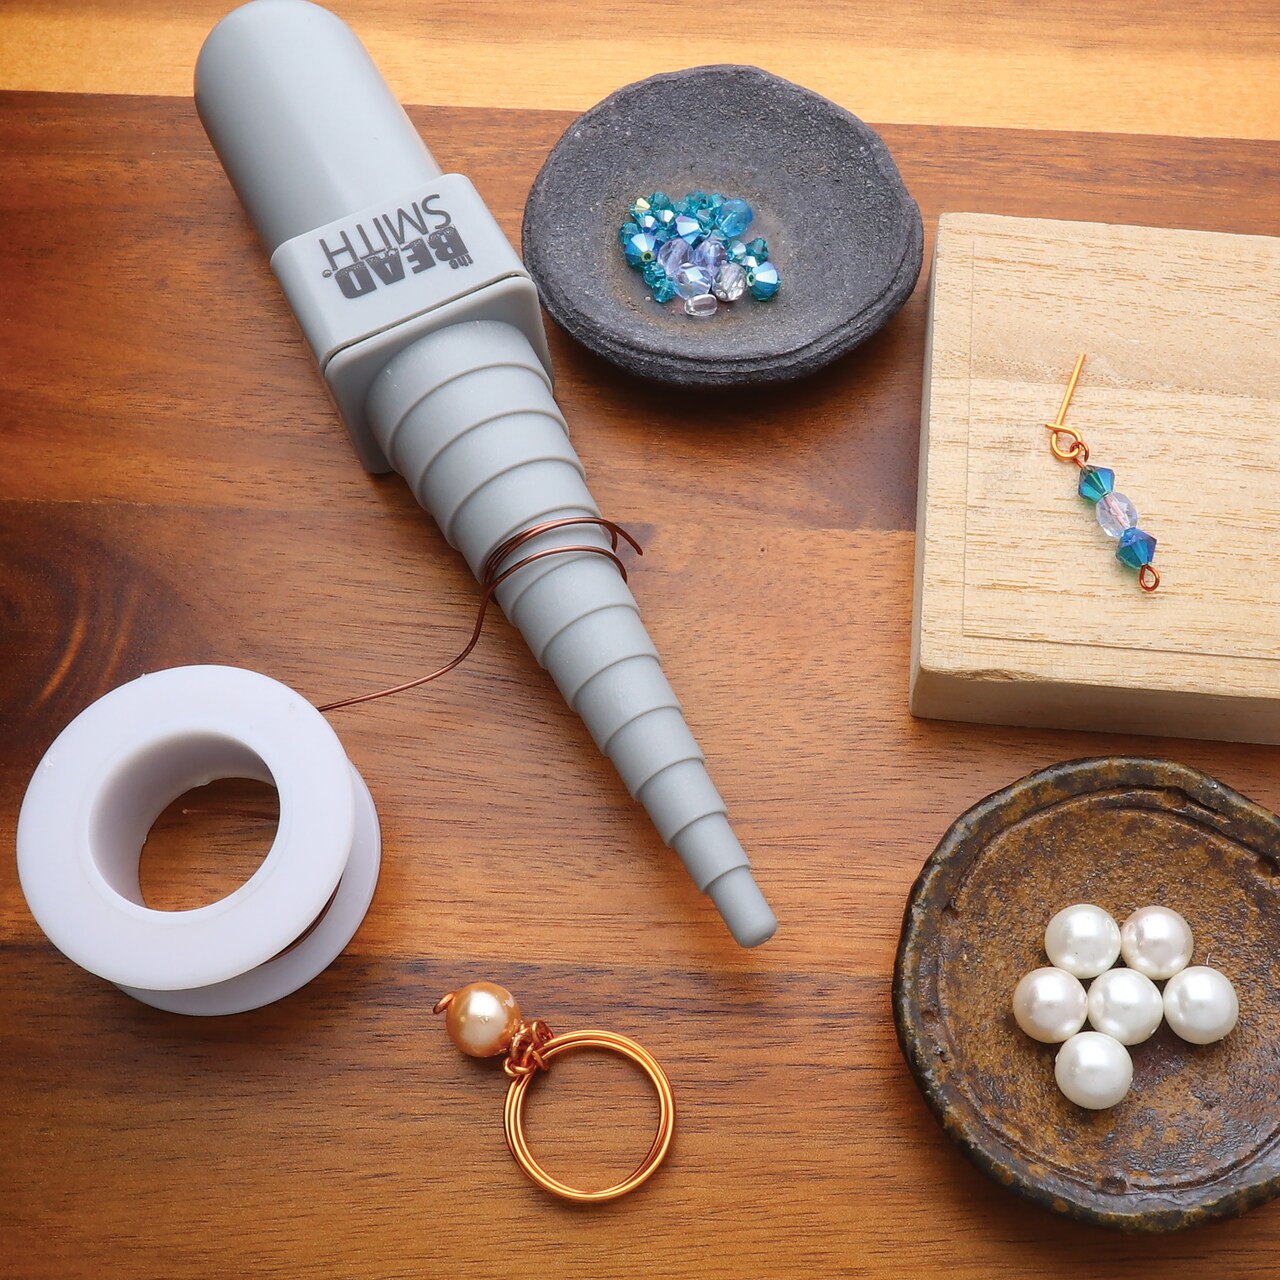 Week of Jewelry Making: New Products Showcase with The Beadsmith